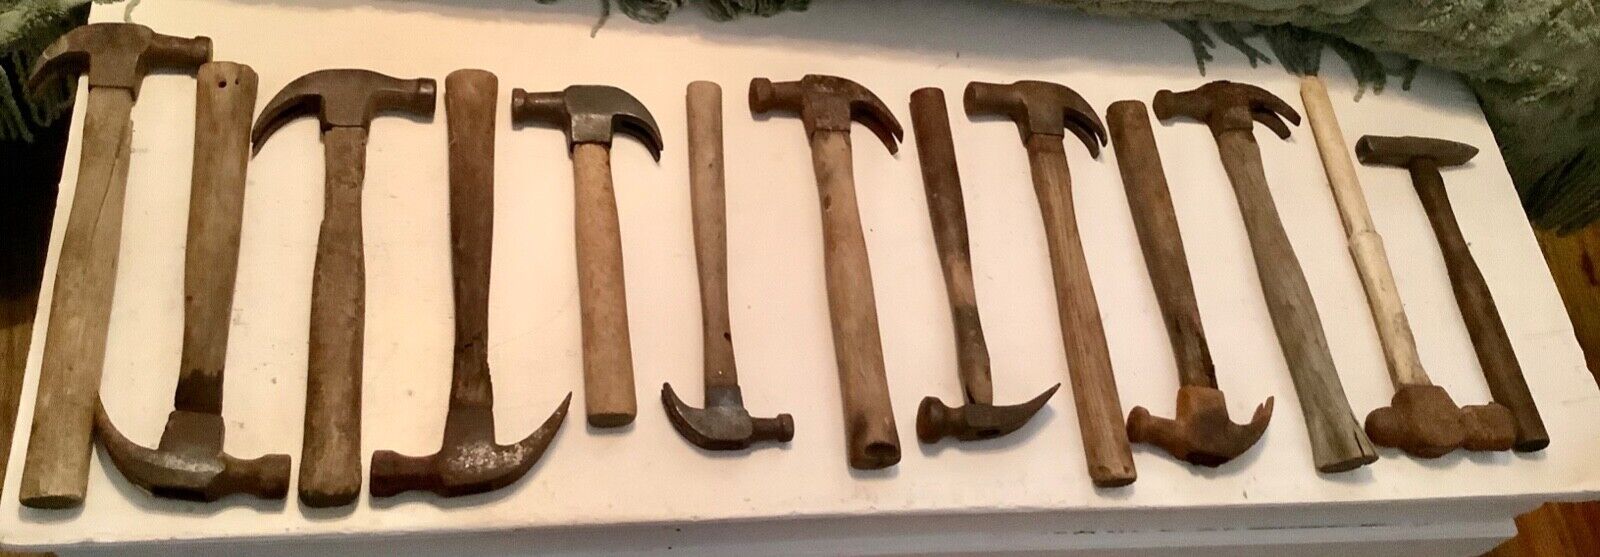 Lot 13 Old Hammer  Claw Vintage Collectible Wood Handle tools